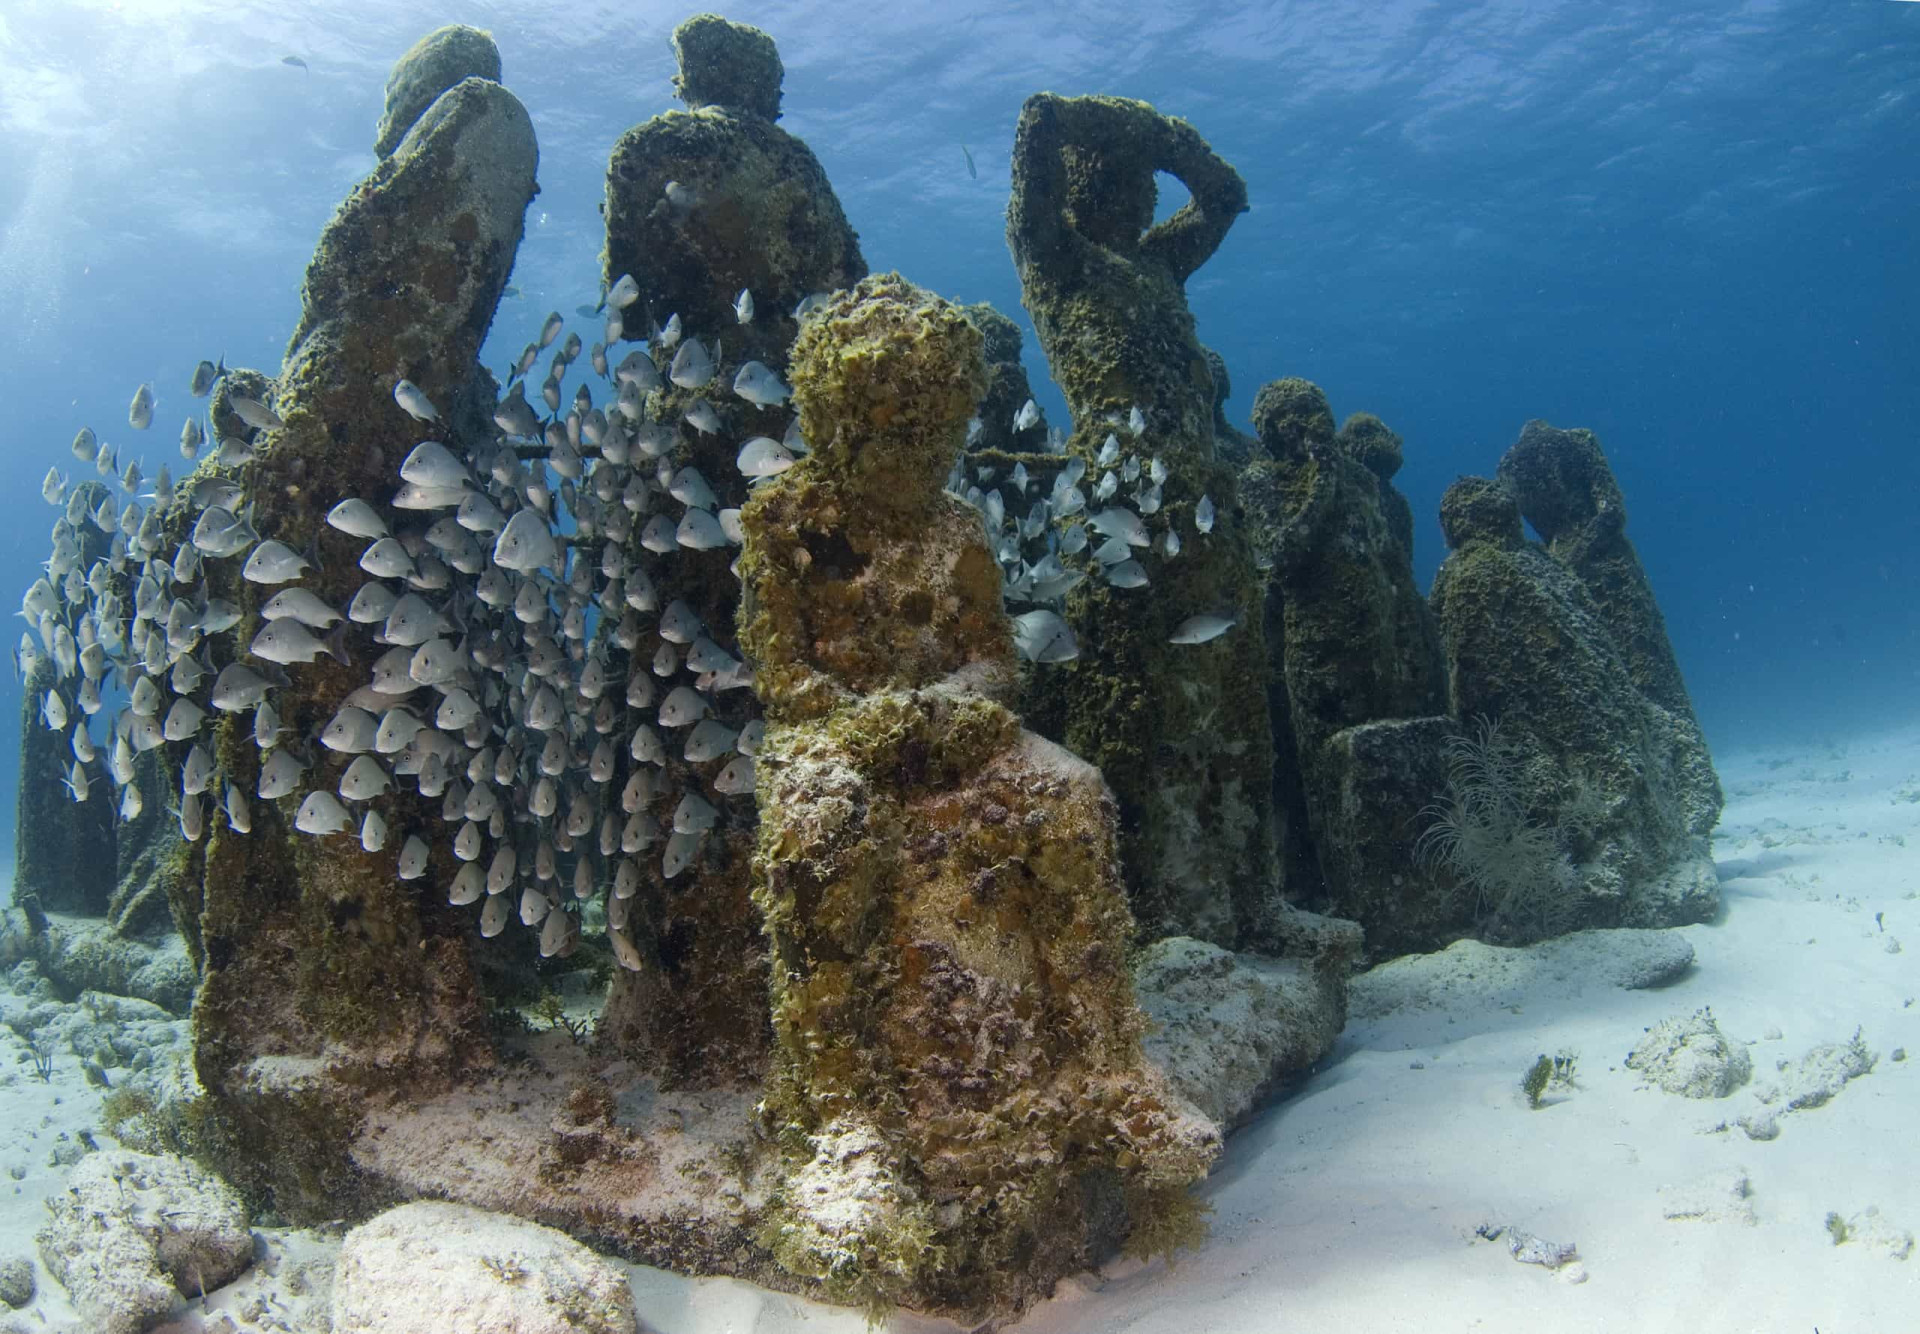 <p>Known as MUSA for Museo Subacuático de Arte, this museum opened in 2010 in an effort to save the area's coral reefs by providing an alternative diving destination.</p><p><a href="https://www.msn.com/en-sg/community/channel/vid-7xx8mnucu55yw63we9va2gwr7uihbxwc68fxqp25x6tg4ftibpra?cvid=94631541bc0f4f89bfd59158d696ad7e">Follow us and access great exclusive content every day</a></p>